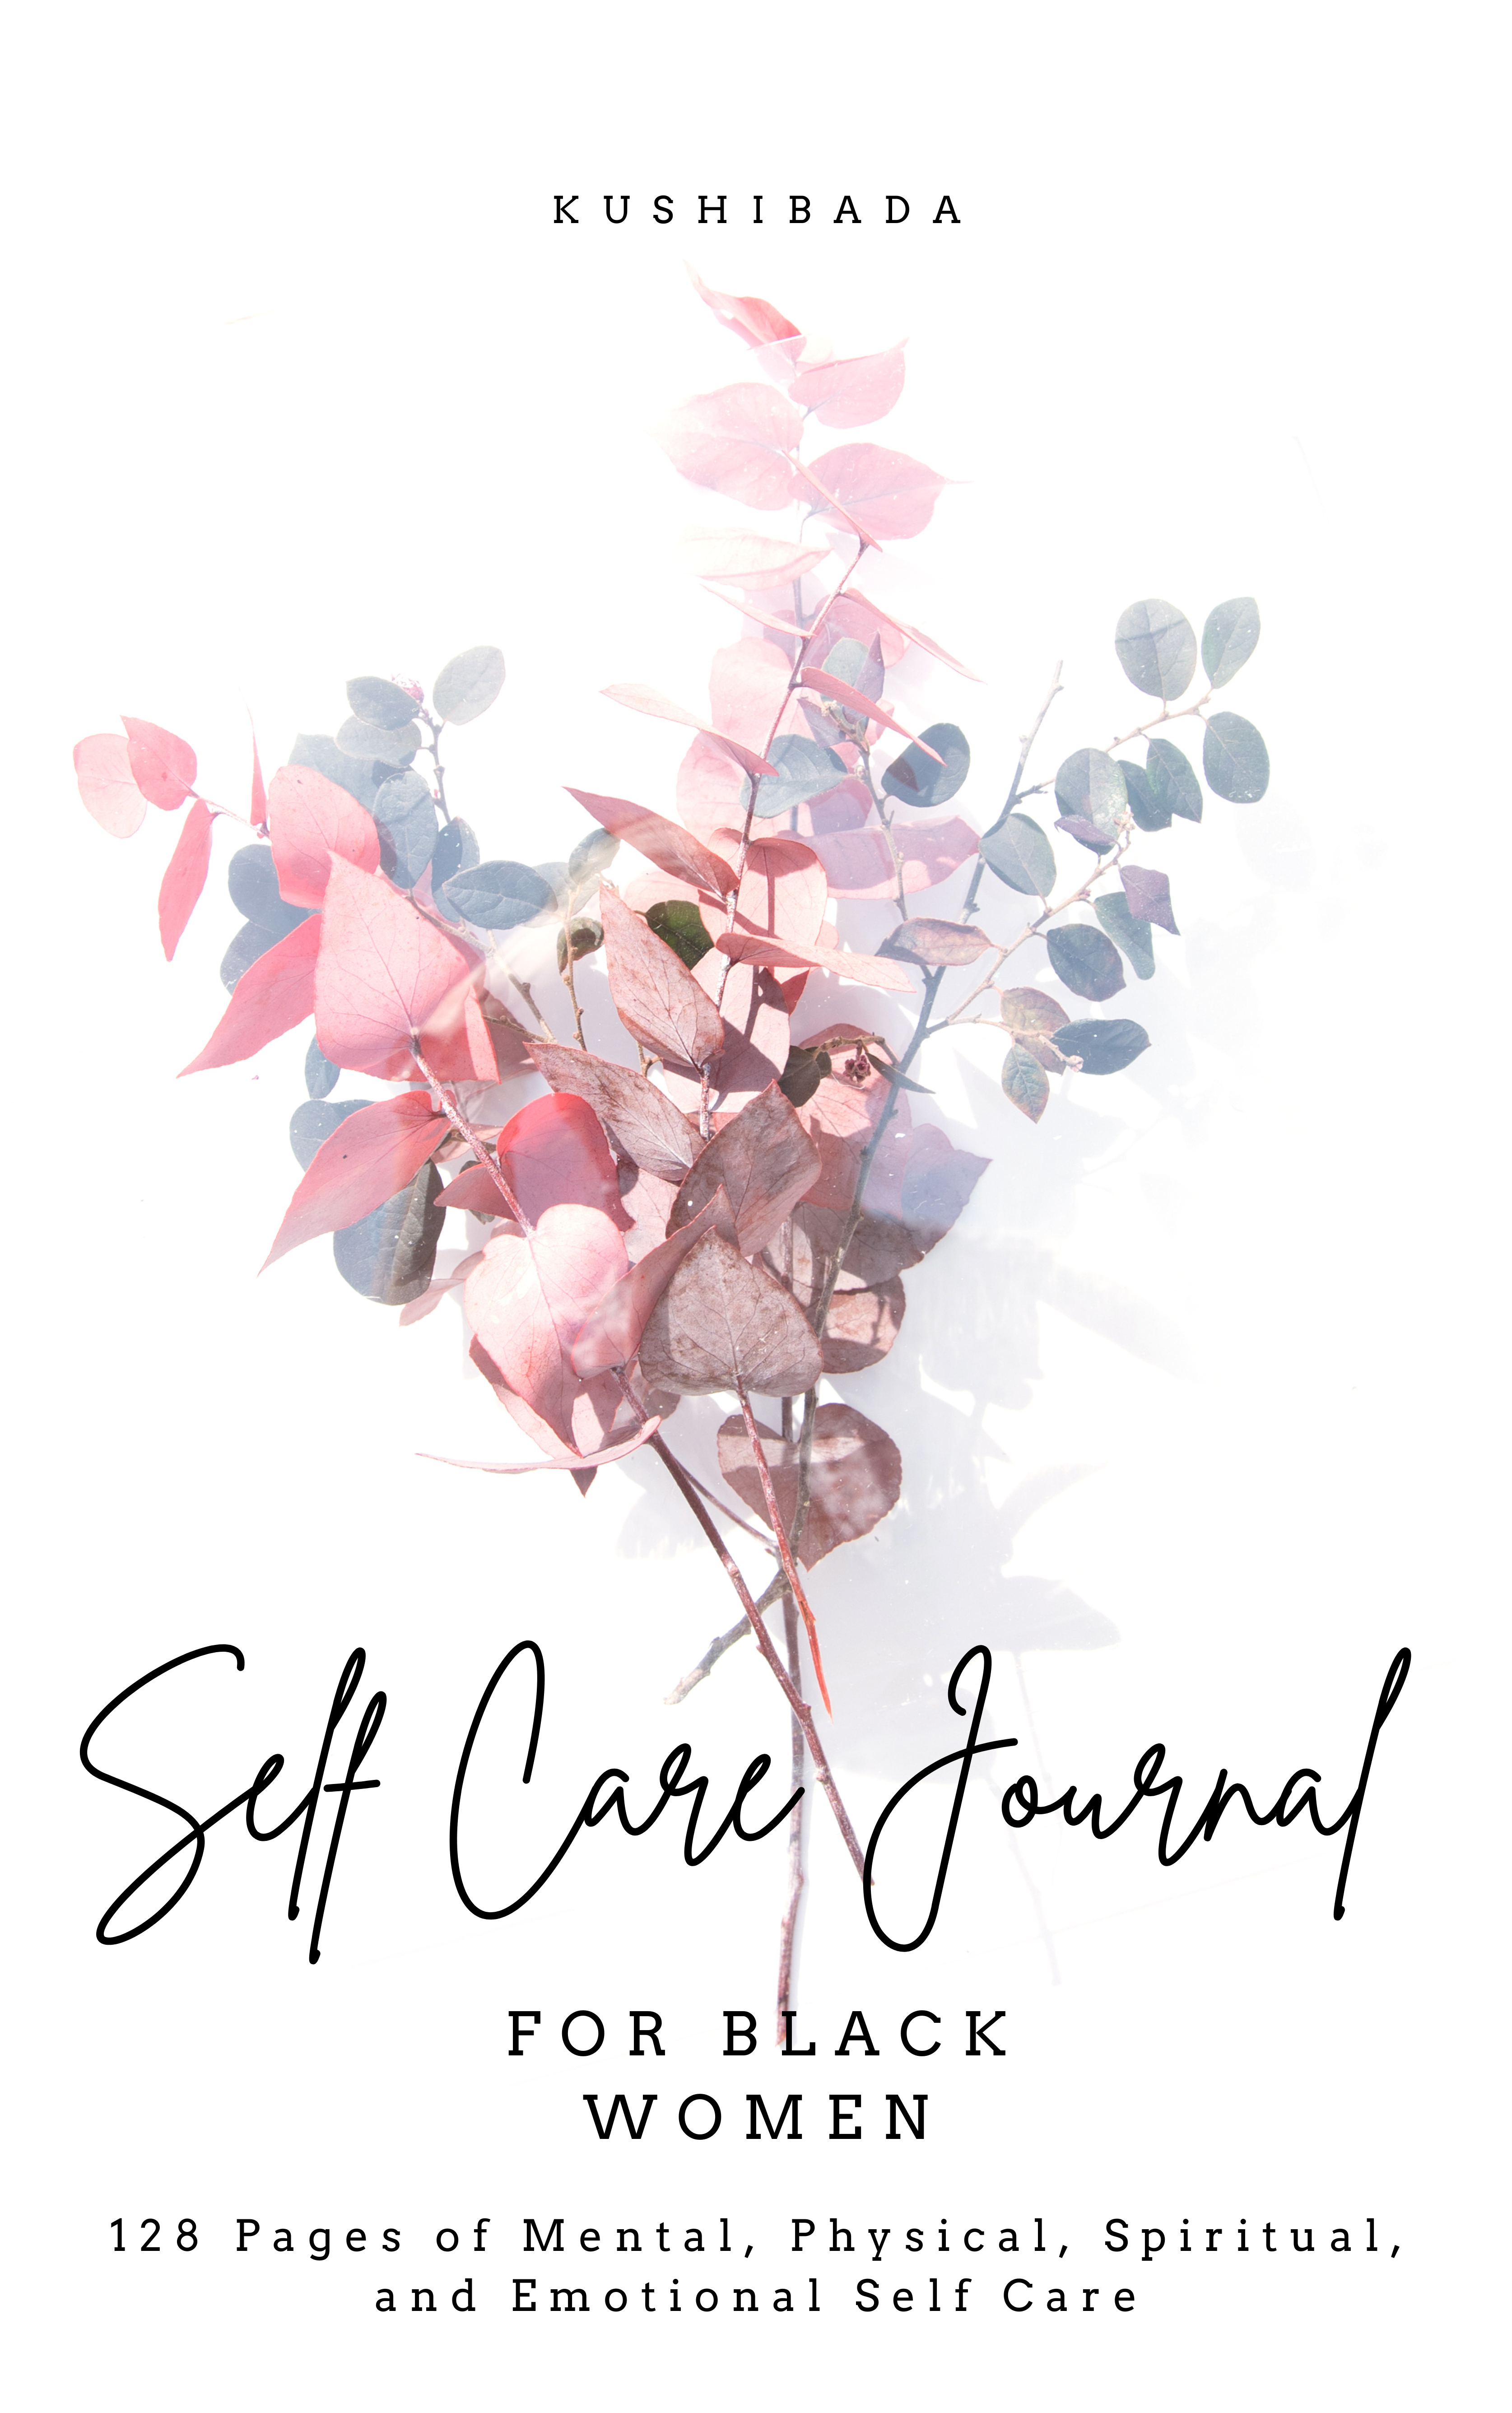 Empower Yourself with the Self Care Journal for Black Women - 128 Pages of Mental, Physical, Spiritual, and Emotional Self Care